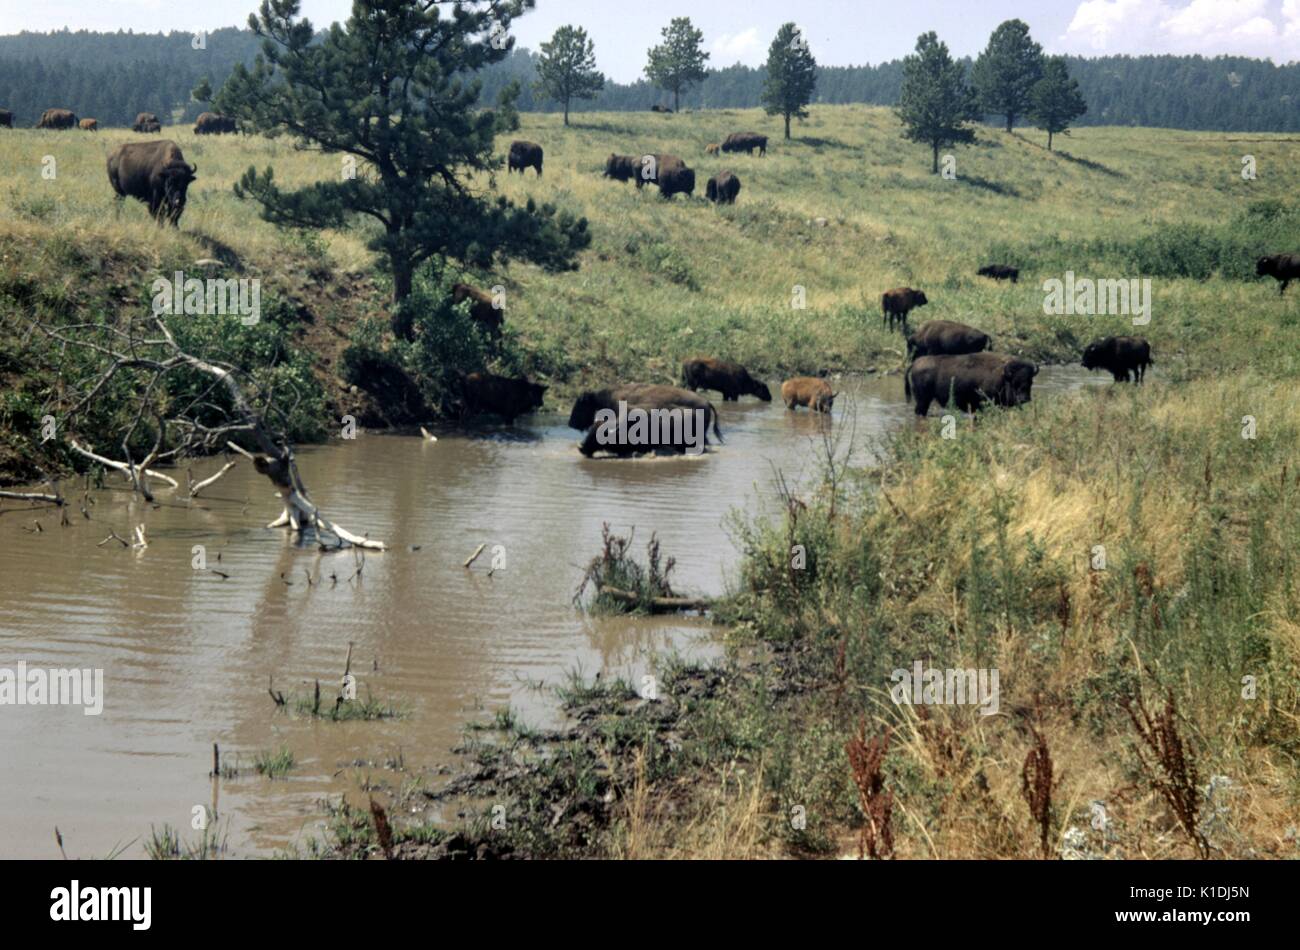 A herd of buffalo congregate and graze, in and around a watering hole, both adults and juveniles can be seen, mountains visible in the distance, Wyoming, 1975. Stock Photo